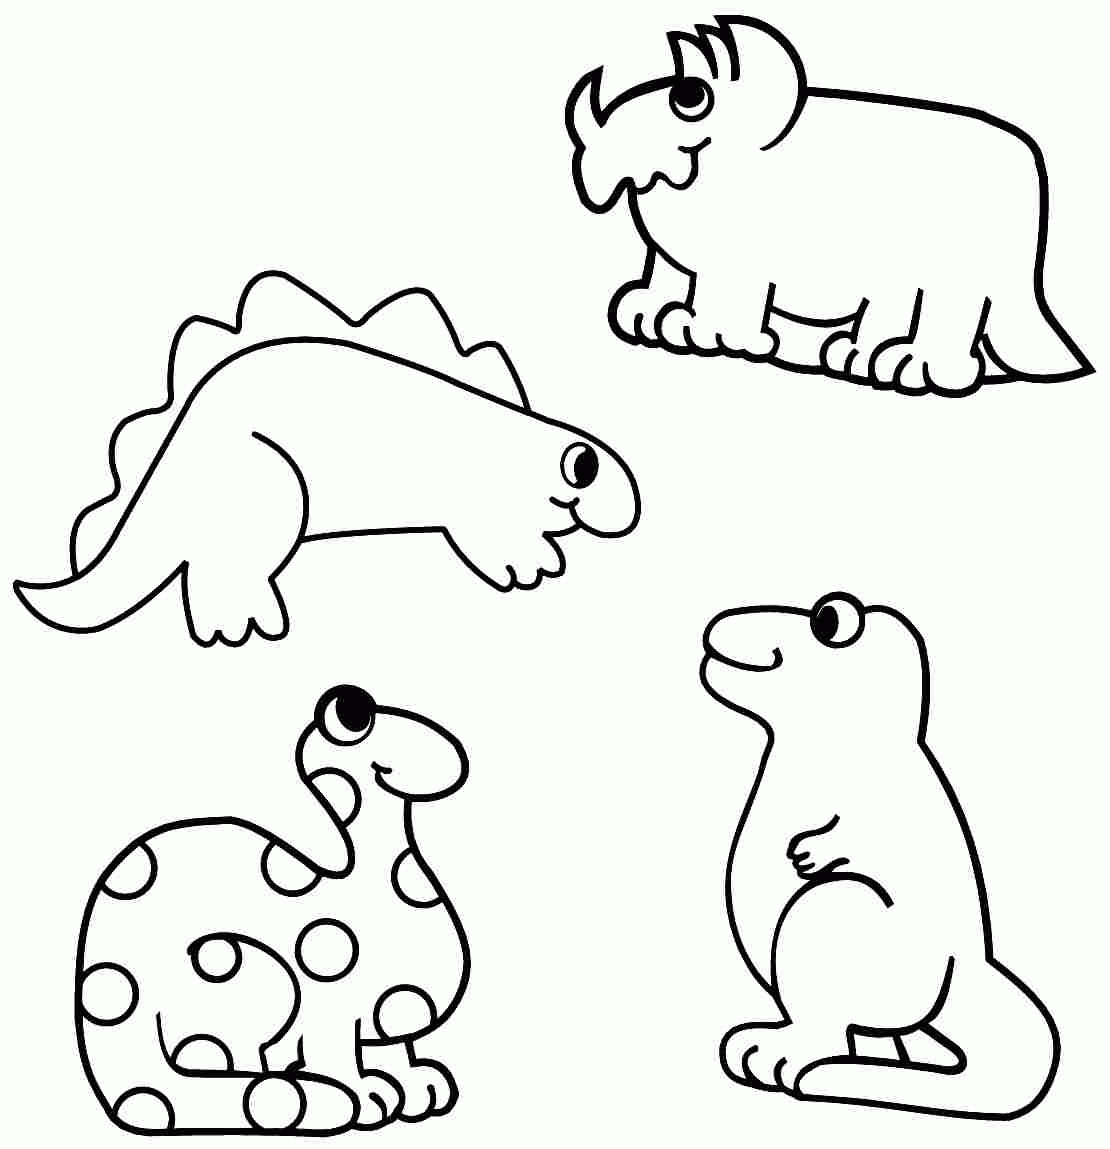 Dinosaur Color Pages For Preschool - High Quality Coloring Pages